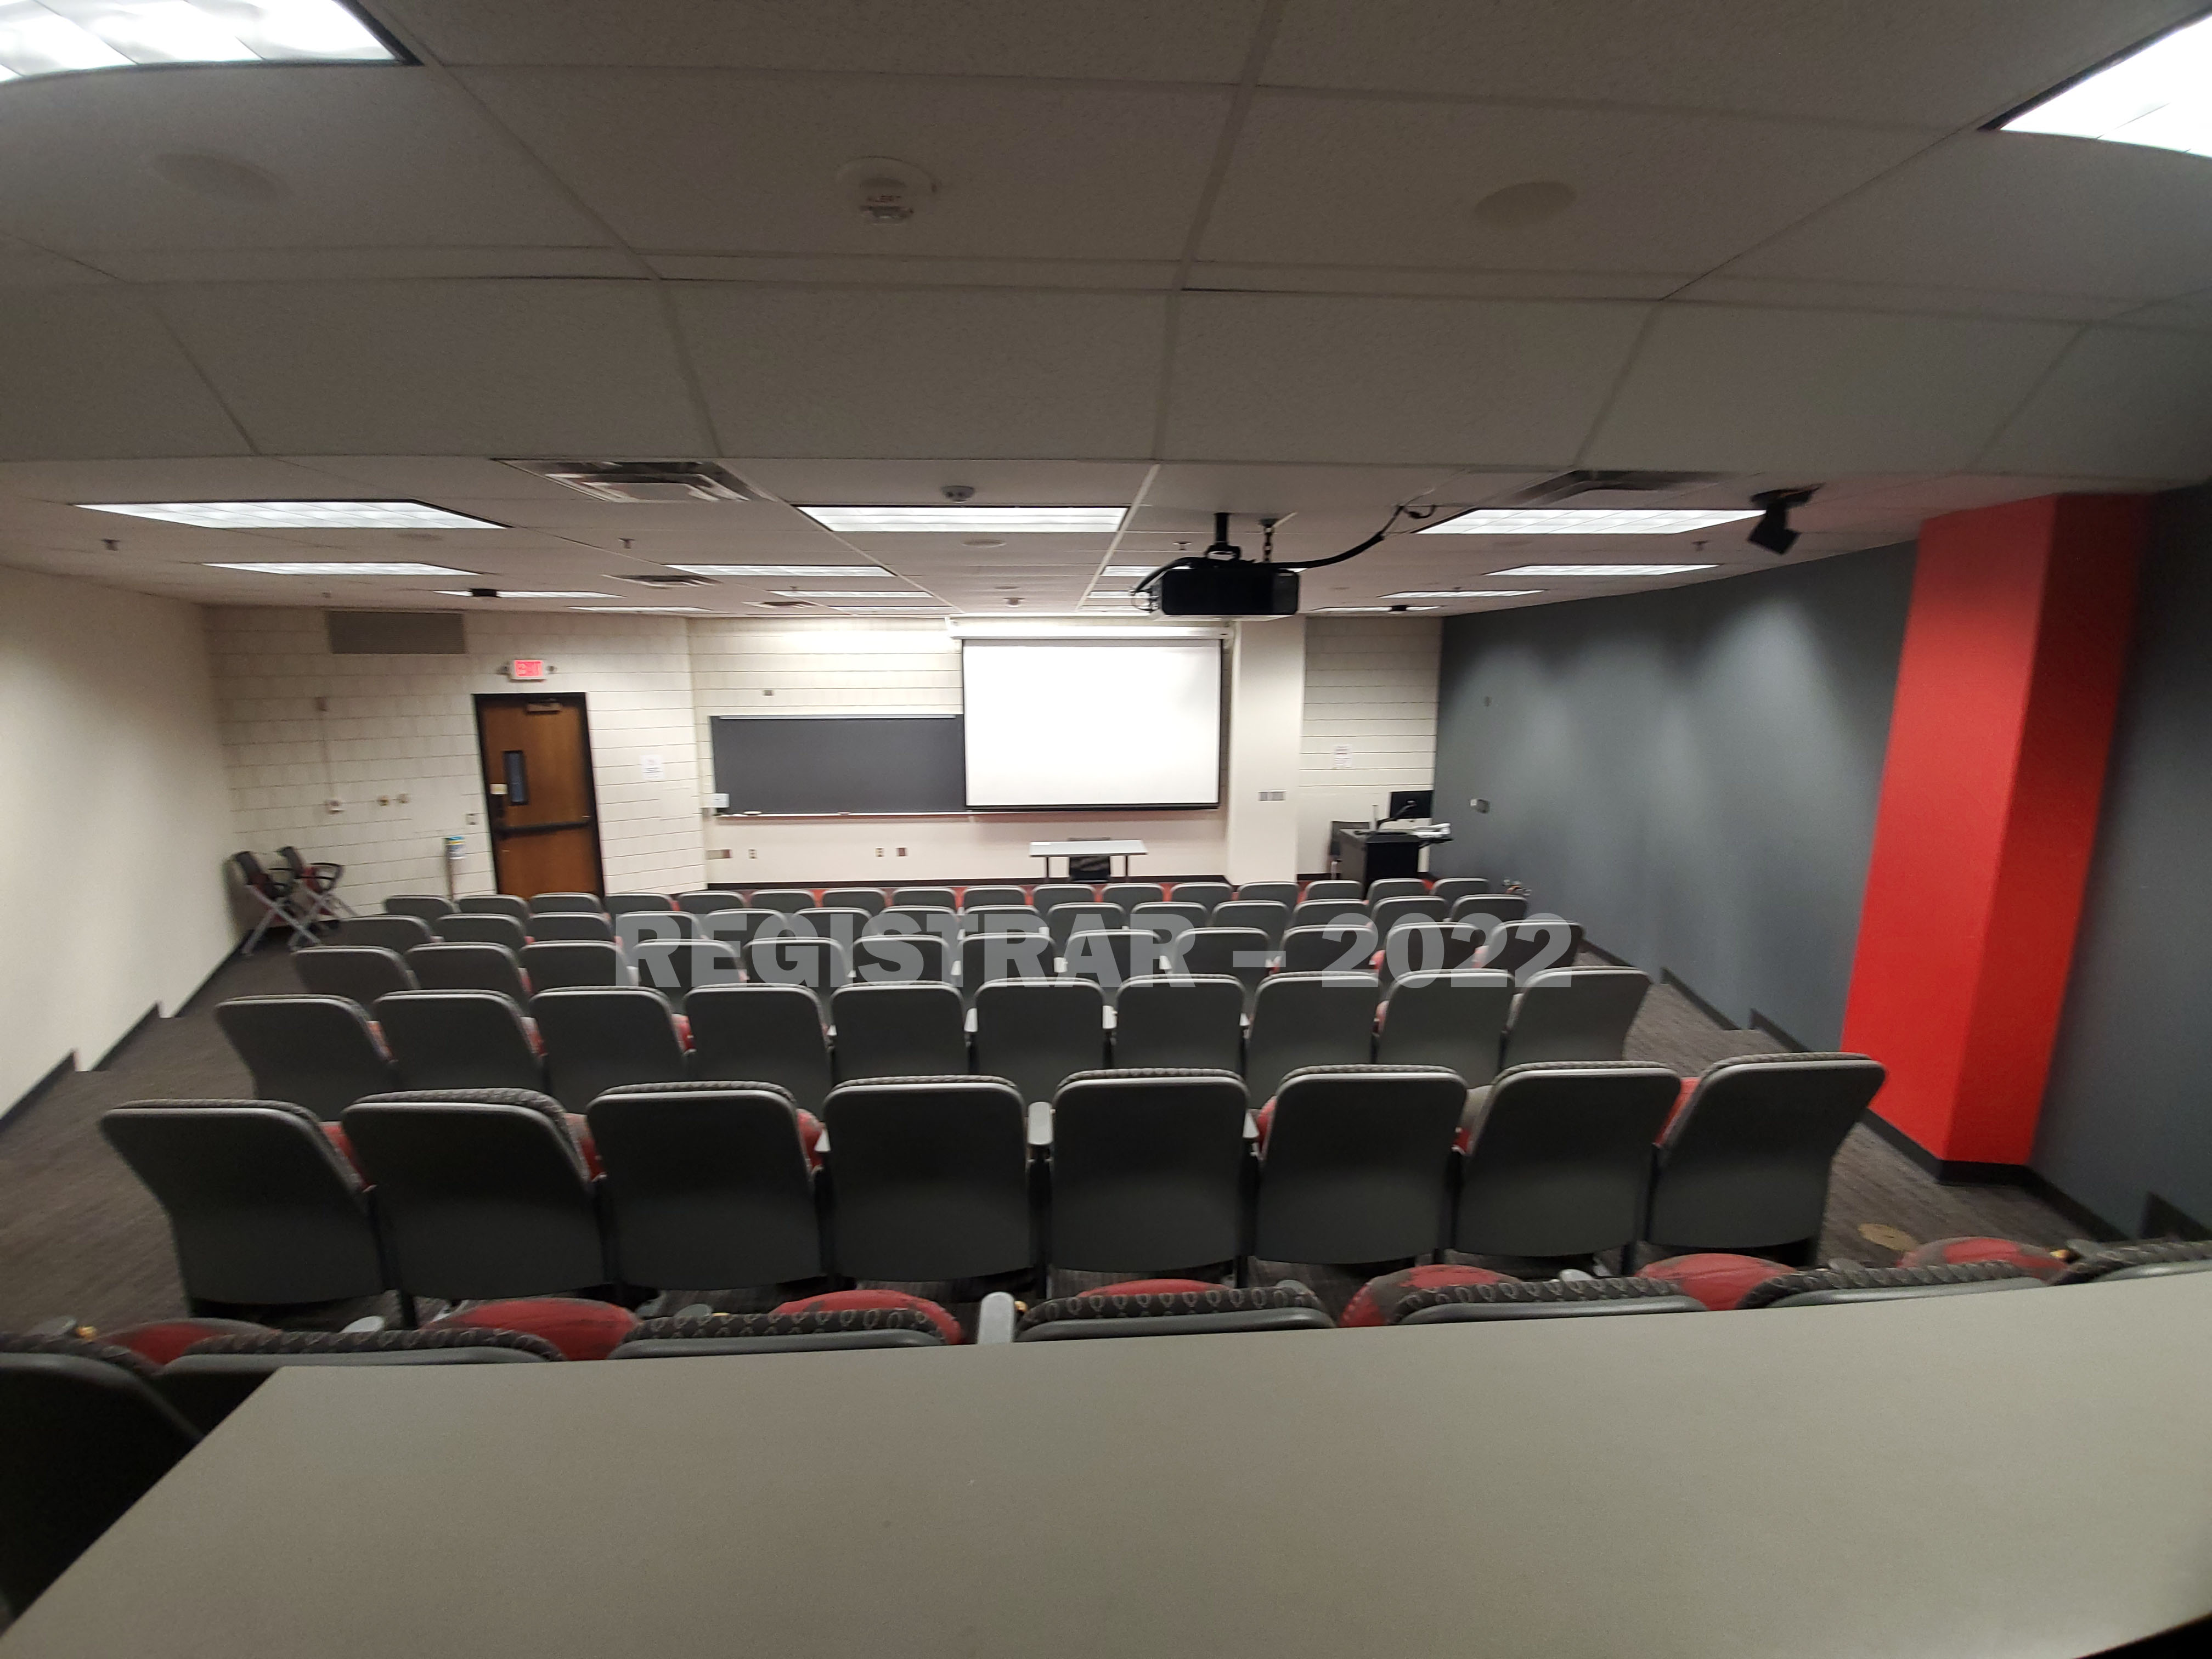 Kottman Hall room 104 ultra wide angle view from the back of the room with projector screen down